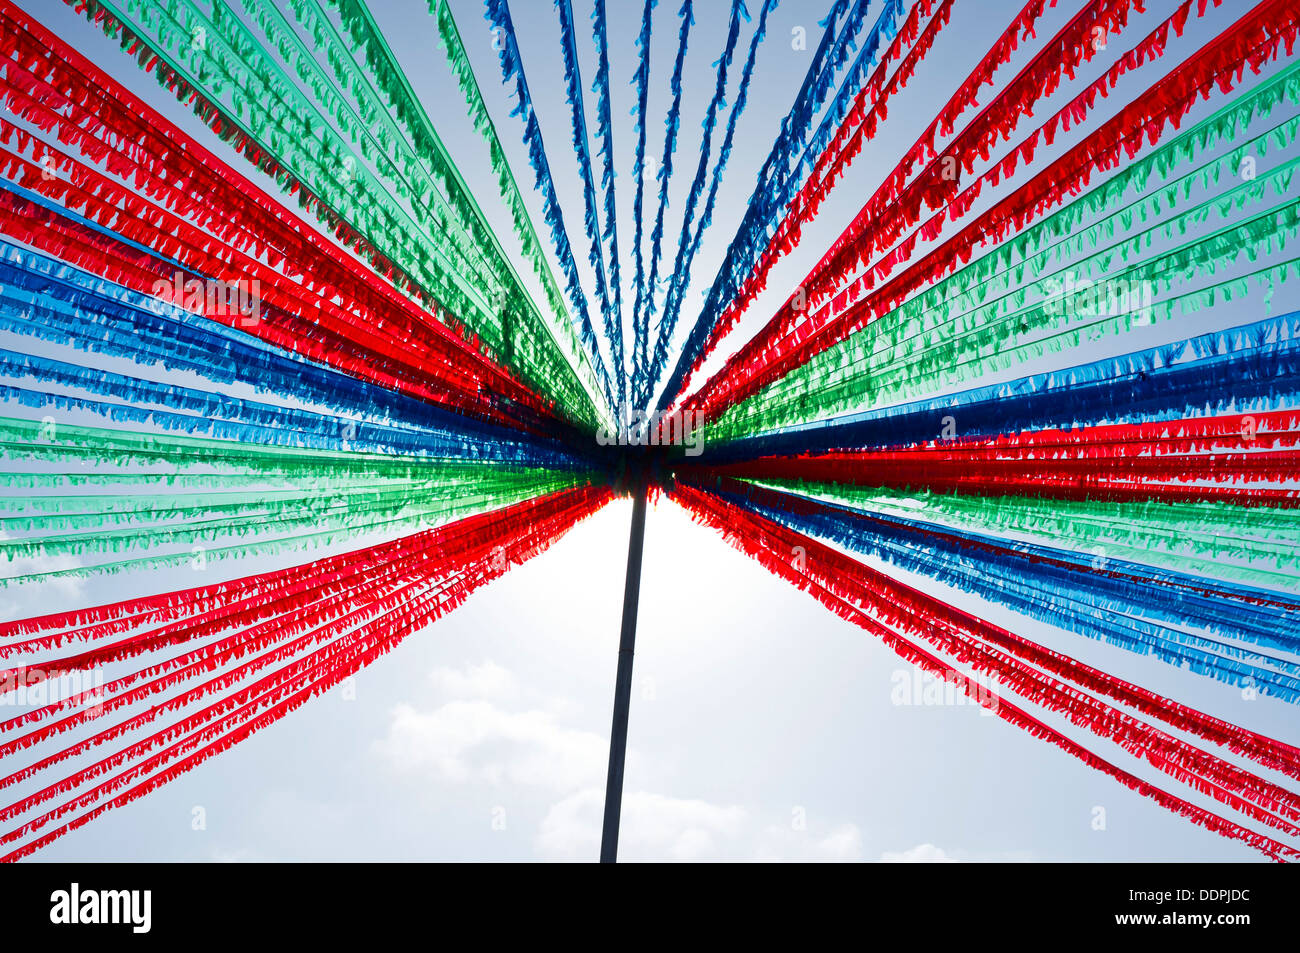 Red green and blue bunting hangs from a support pole against the sky ready for the fiesta in Playa San Juan, Tenerife, Stock Photo